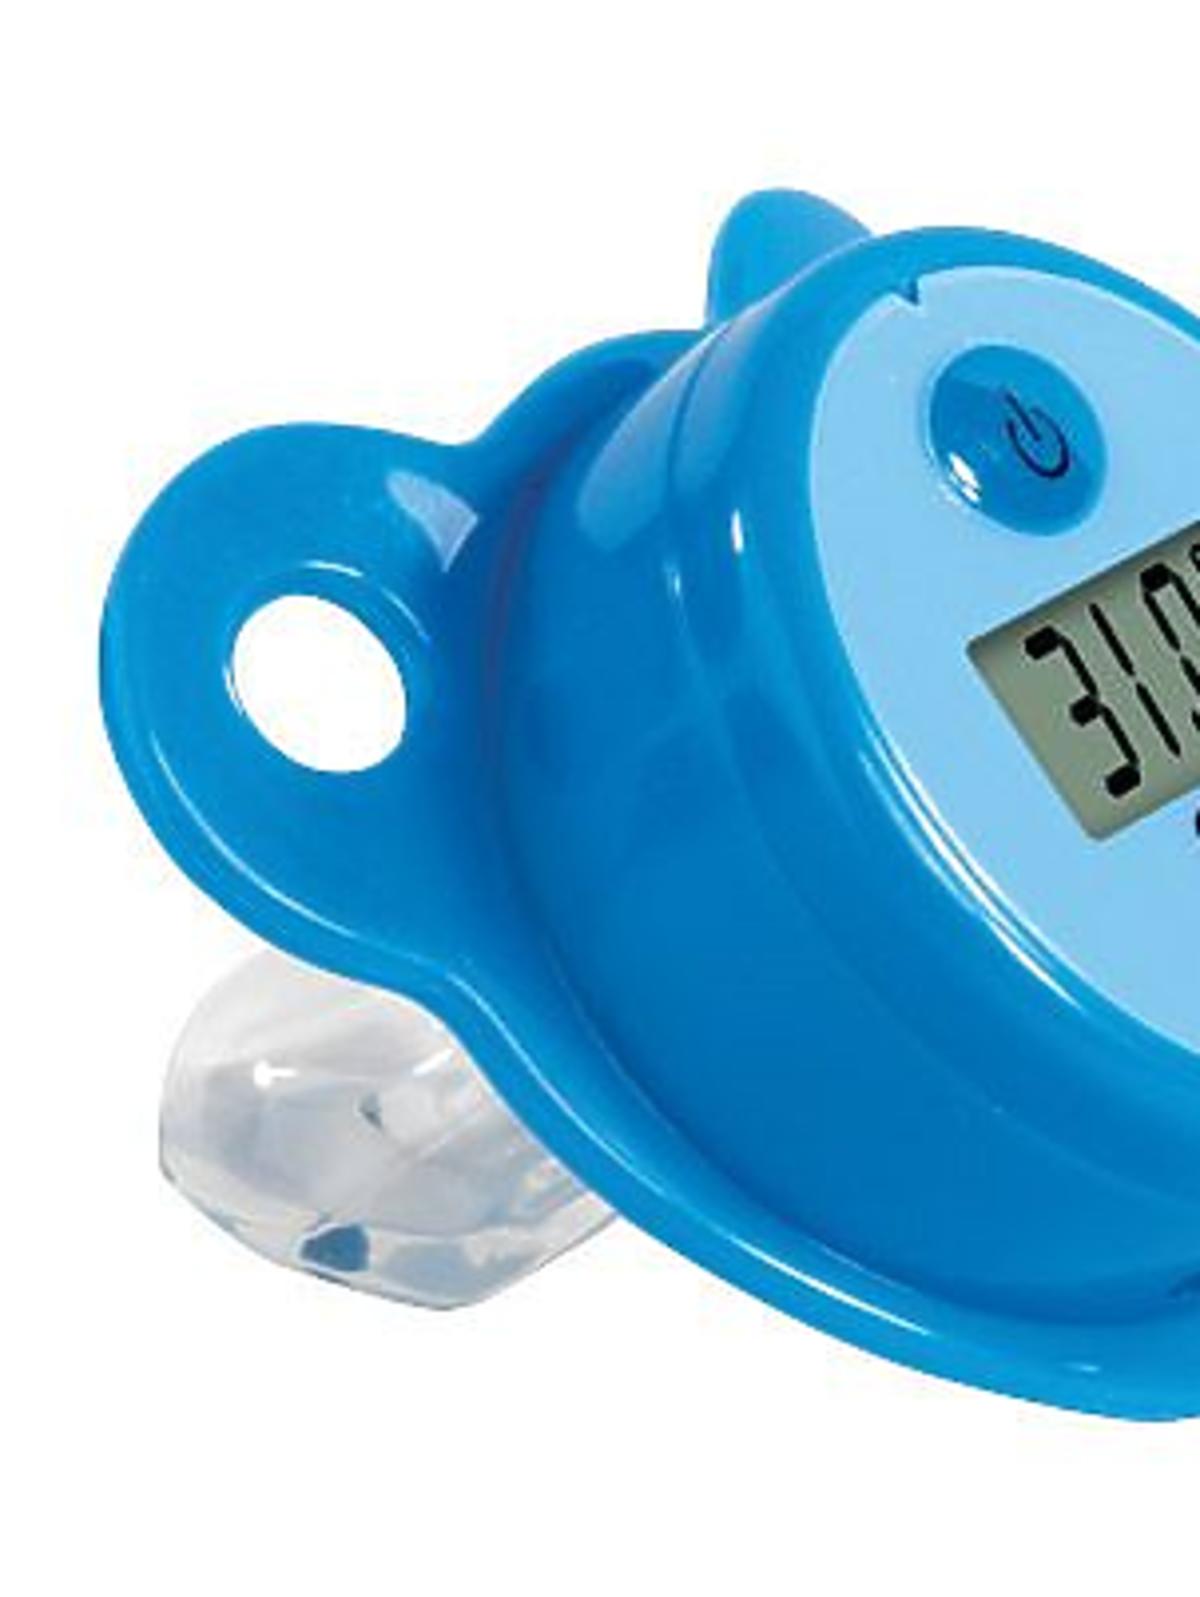 BabySootherThermometer110-Toby.jpg